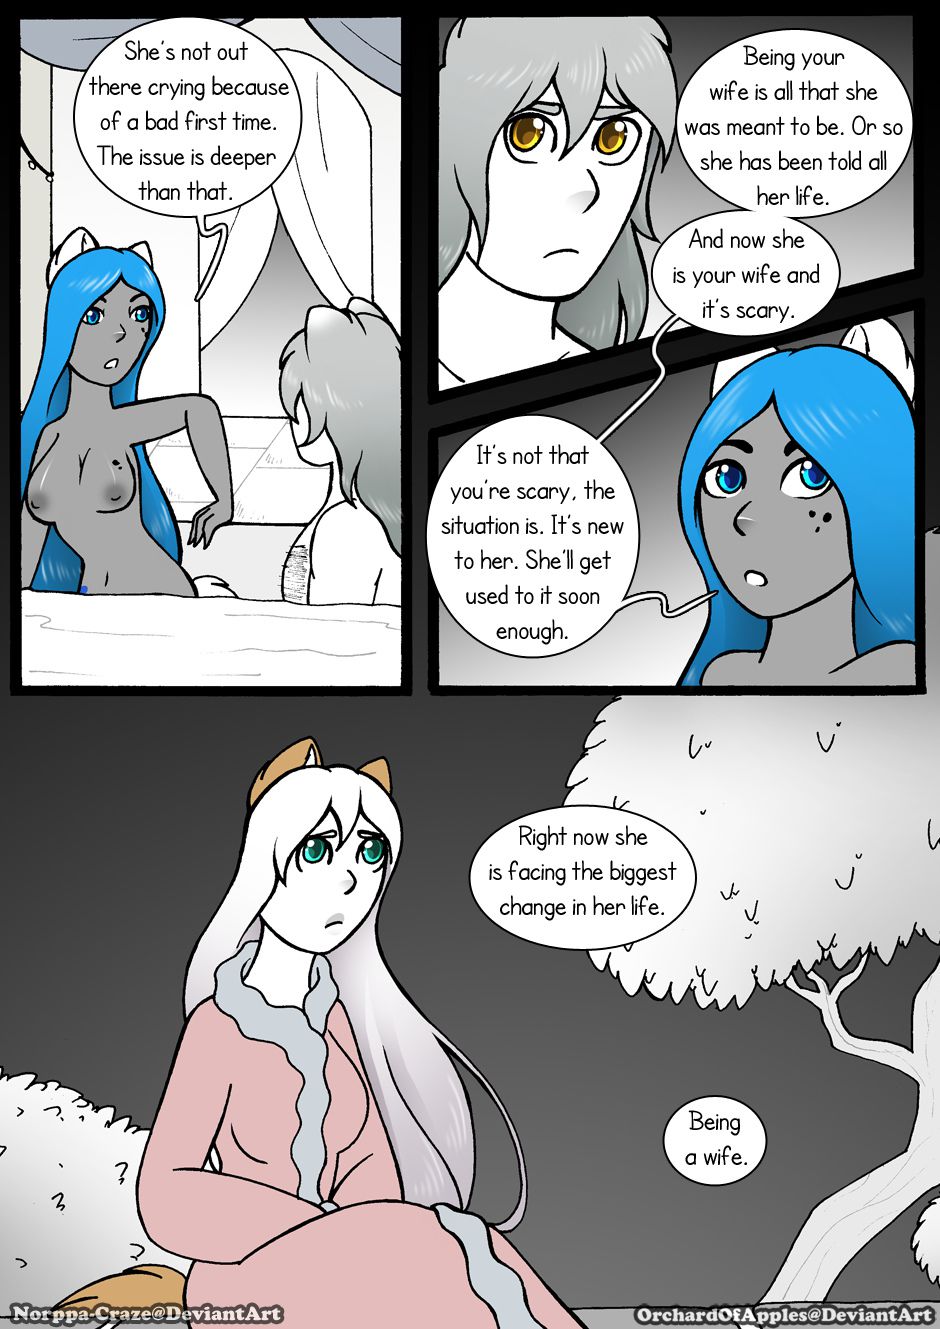 [Jeny-jen94] Between Kings and Queens [Ongoing] 256